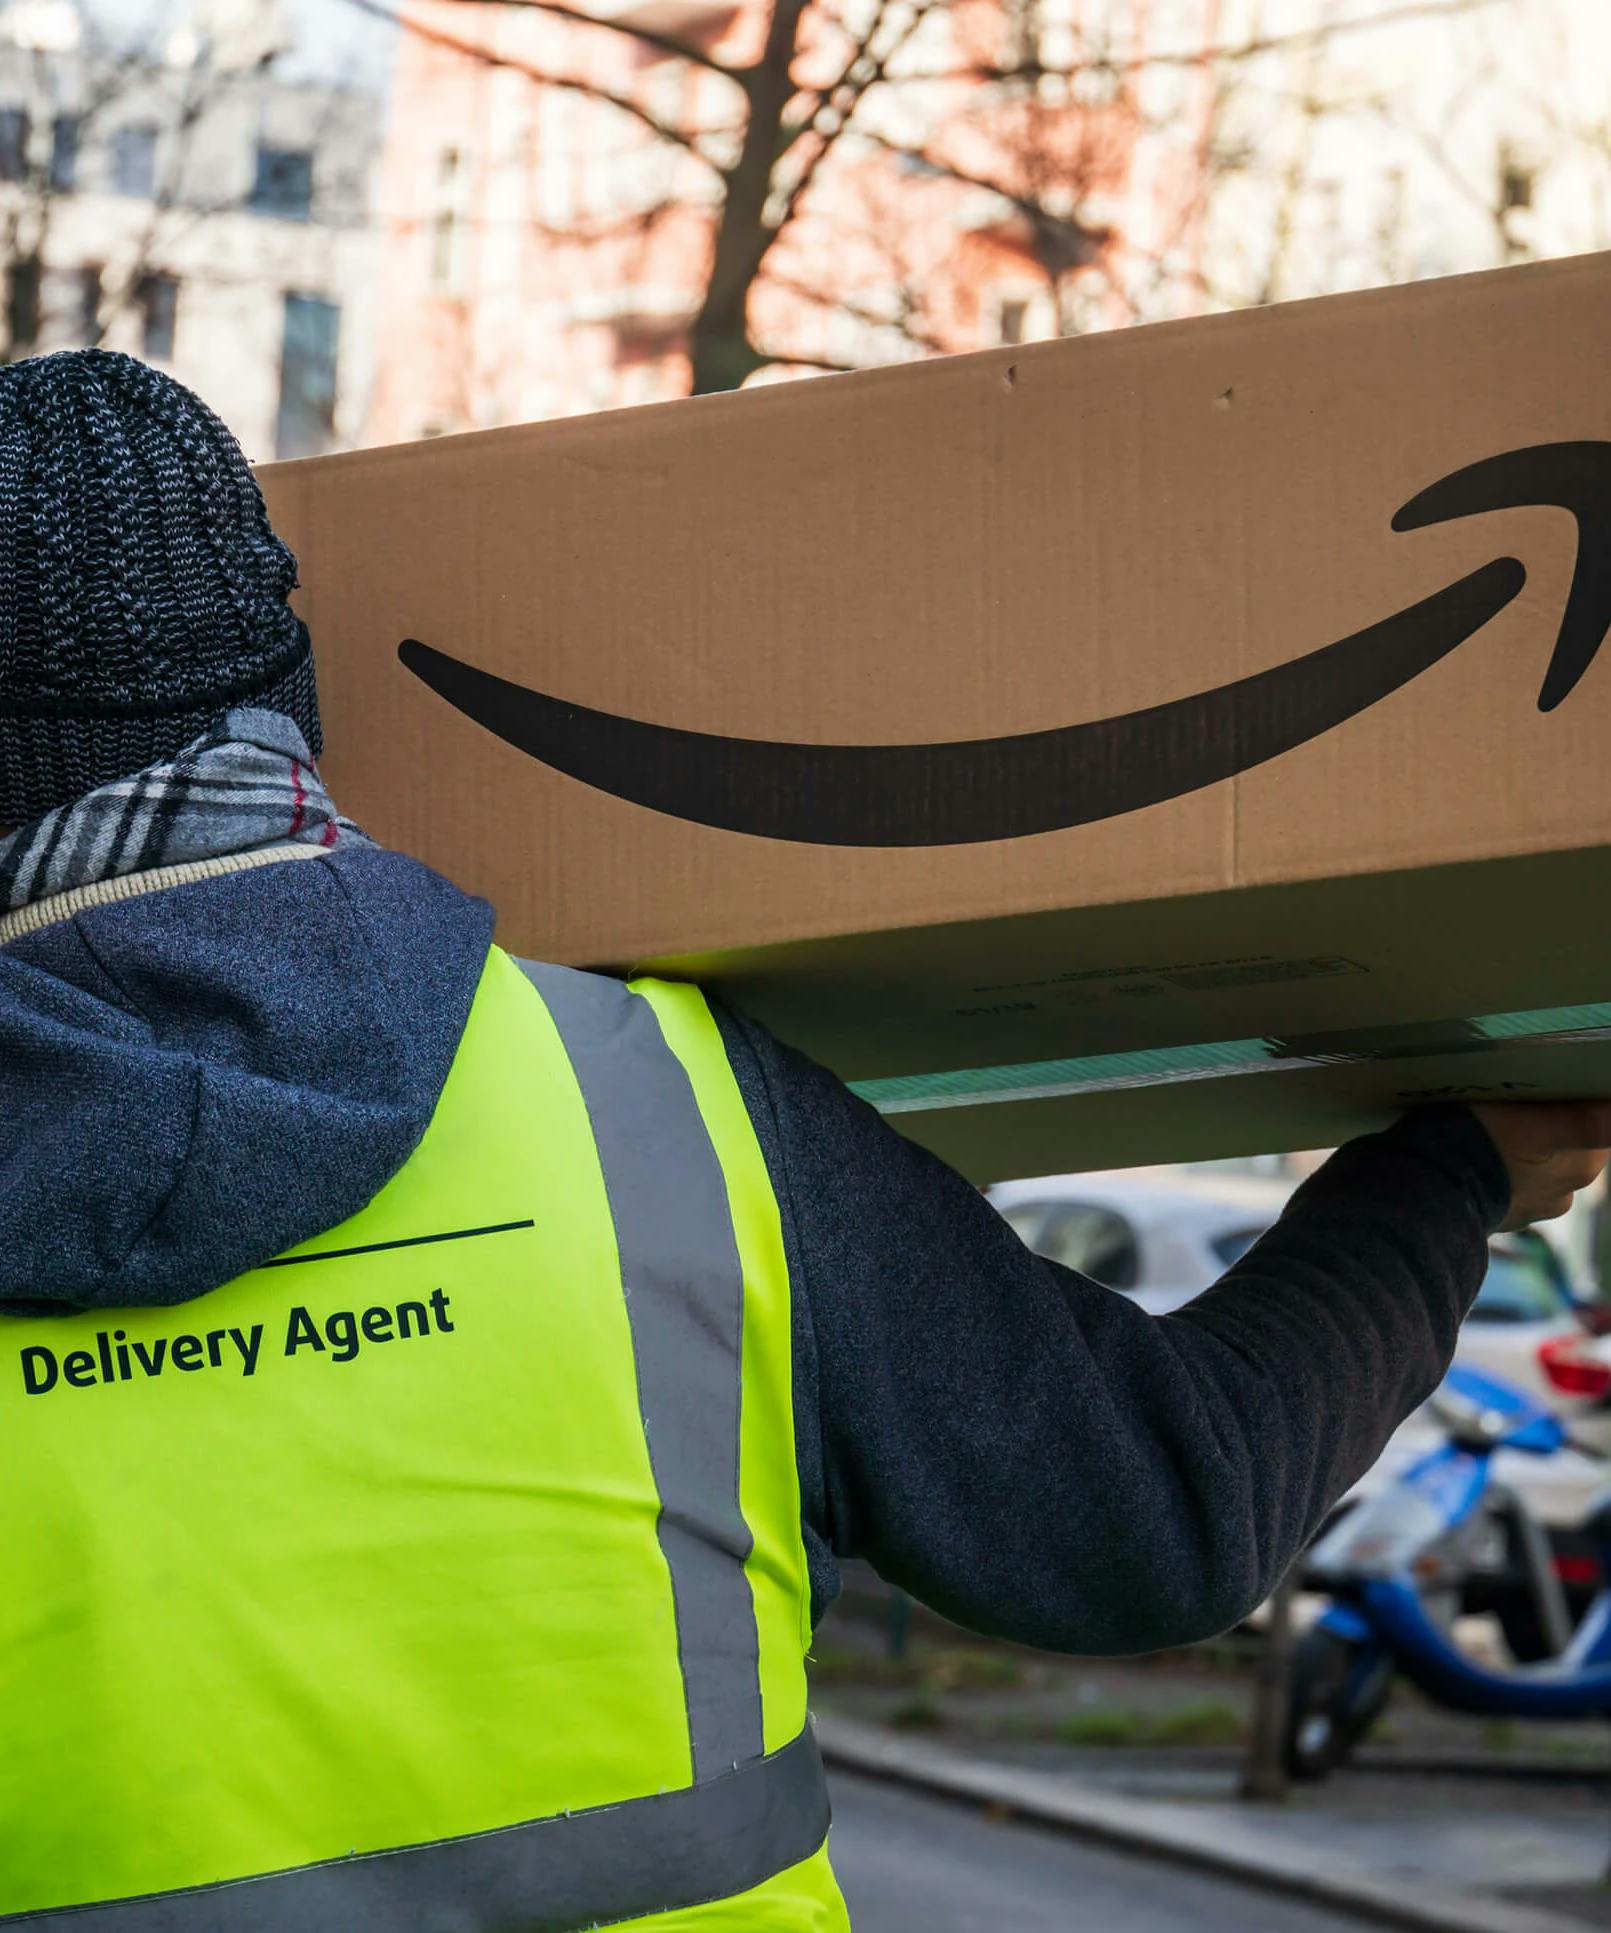 Stimulus Checks Were Supposed To Lift Us Out Of Poverty, But They Just Helped Amazon Instead